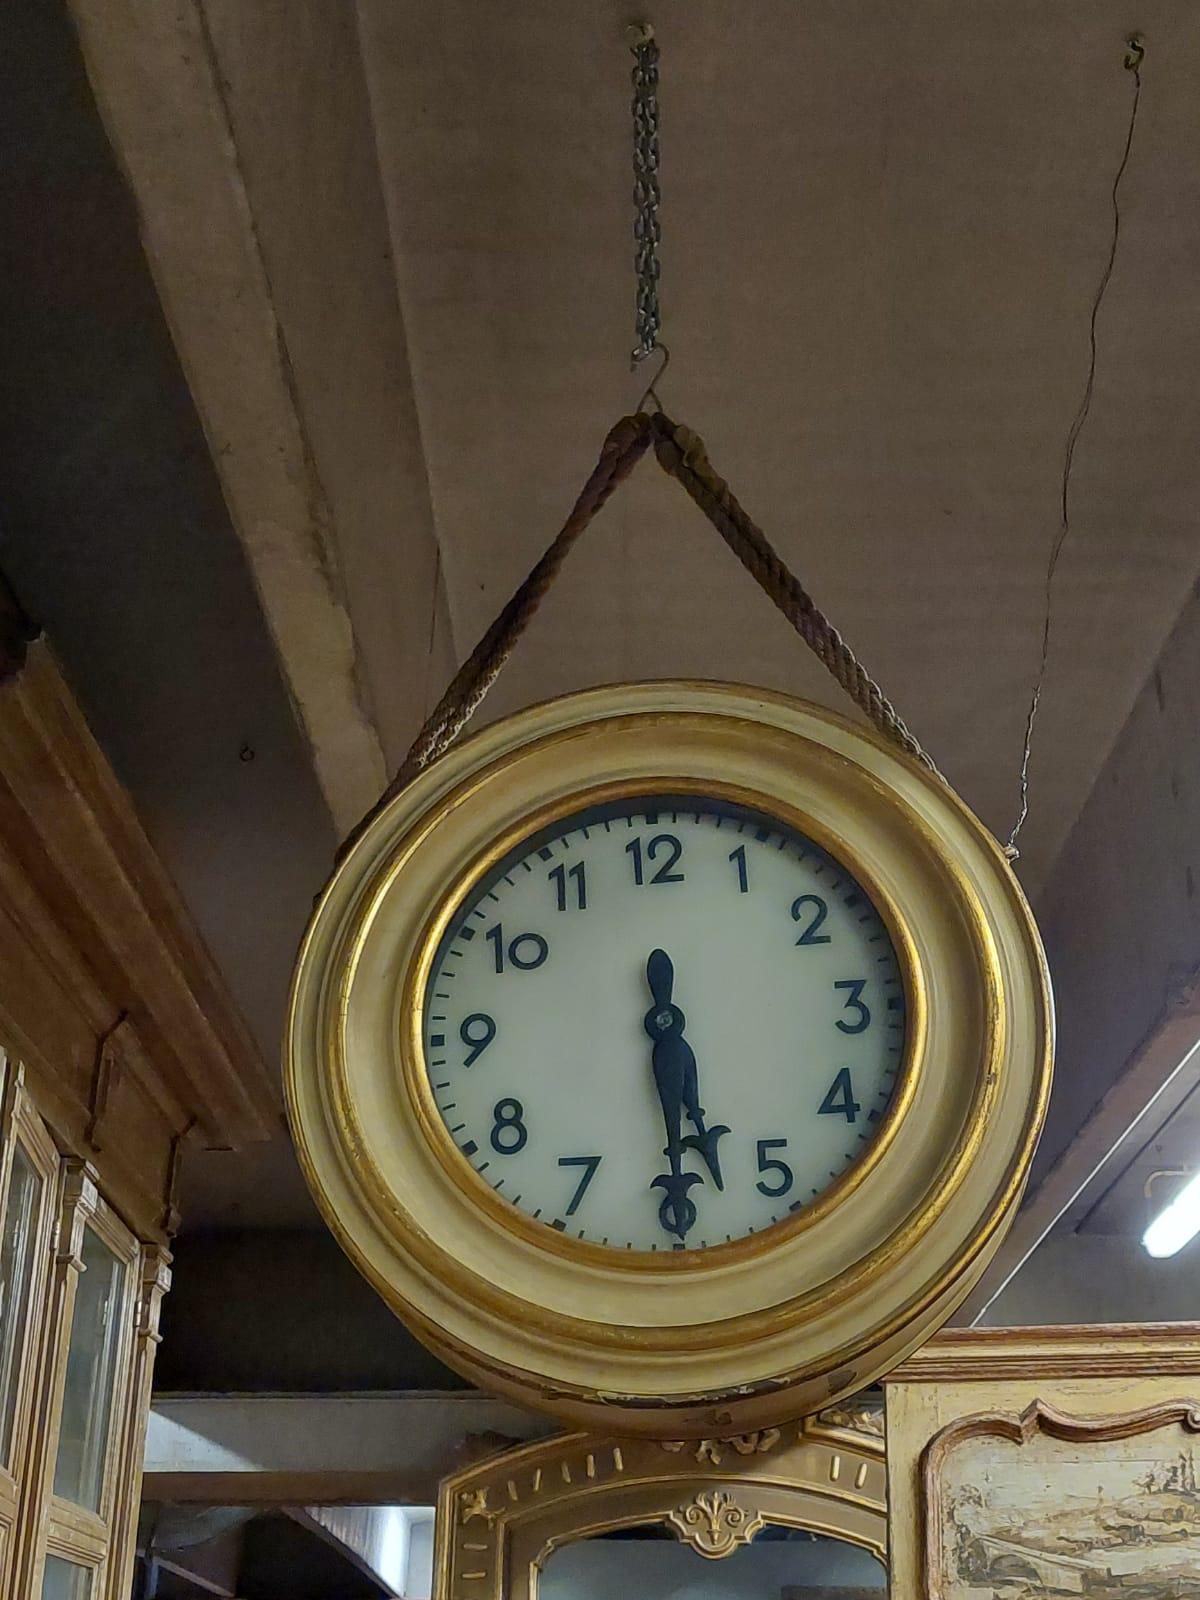 Antique train station clock, round in shape, hand-lacquered with yellow and gilding, the time can be read from both sides, double-faced, carved hands, very nice, it was hung with the original rope. Built in the 19th century for a station in northern